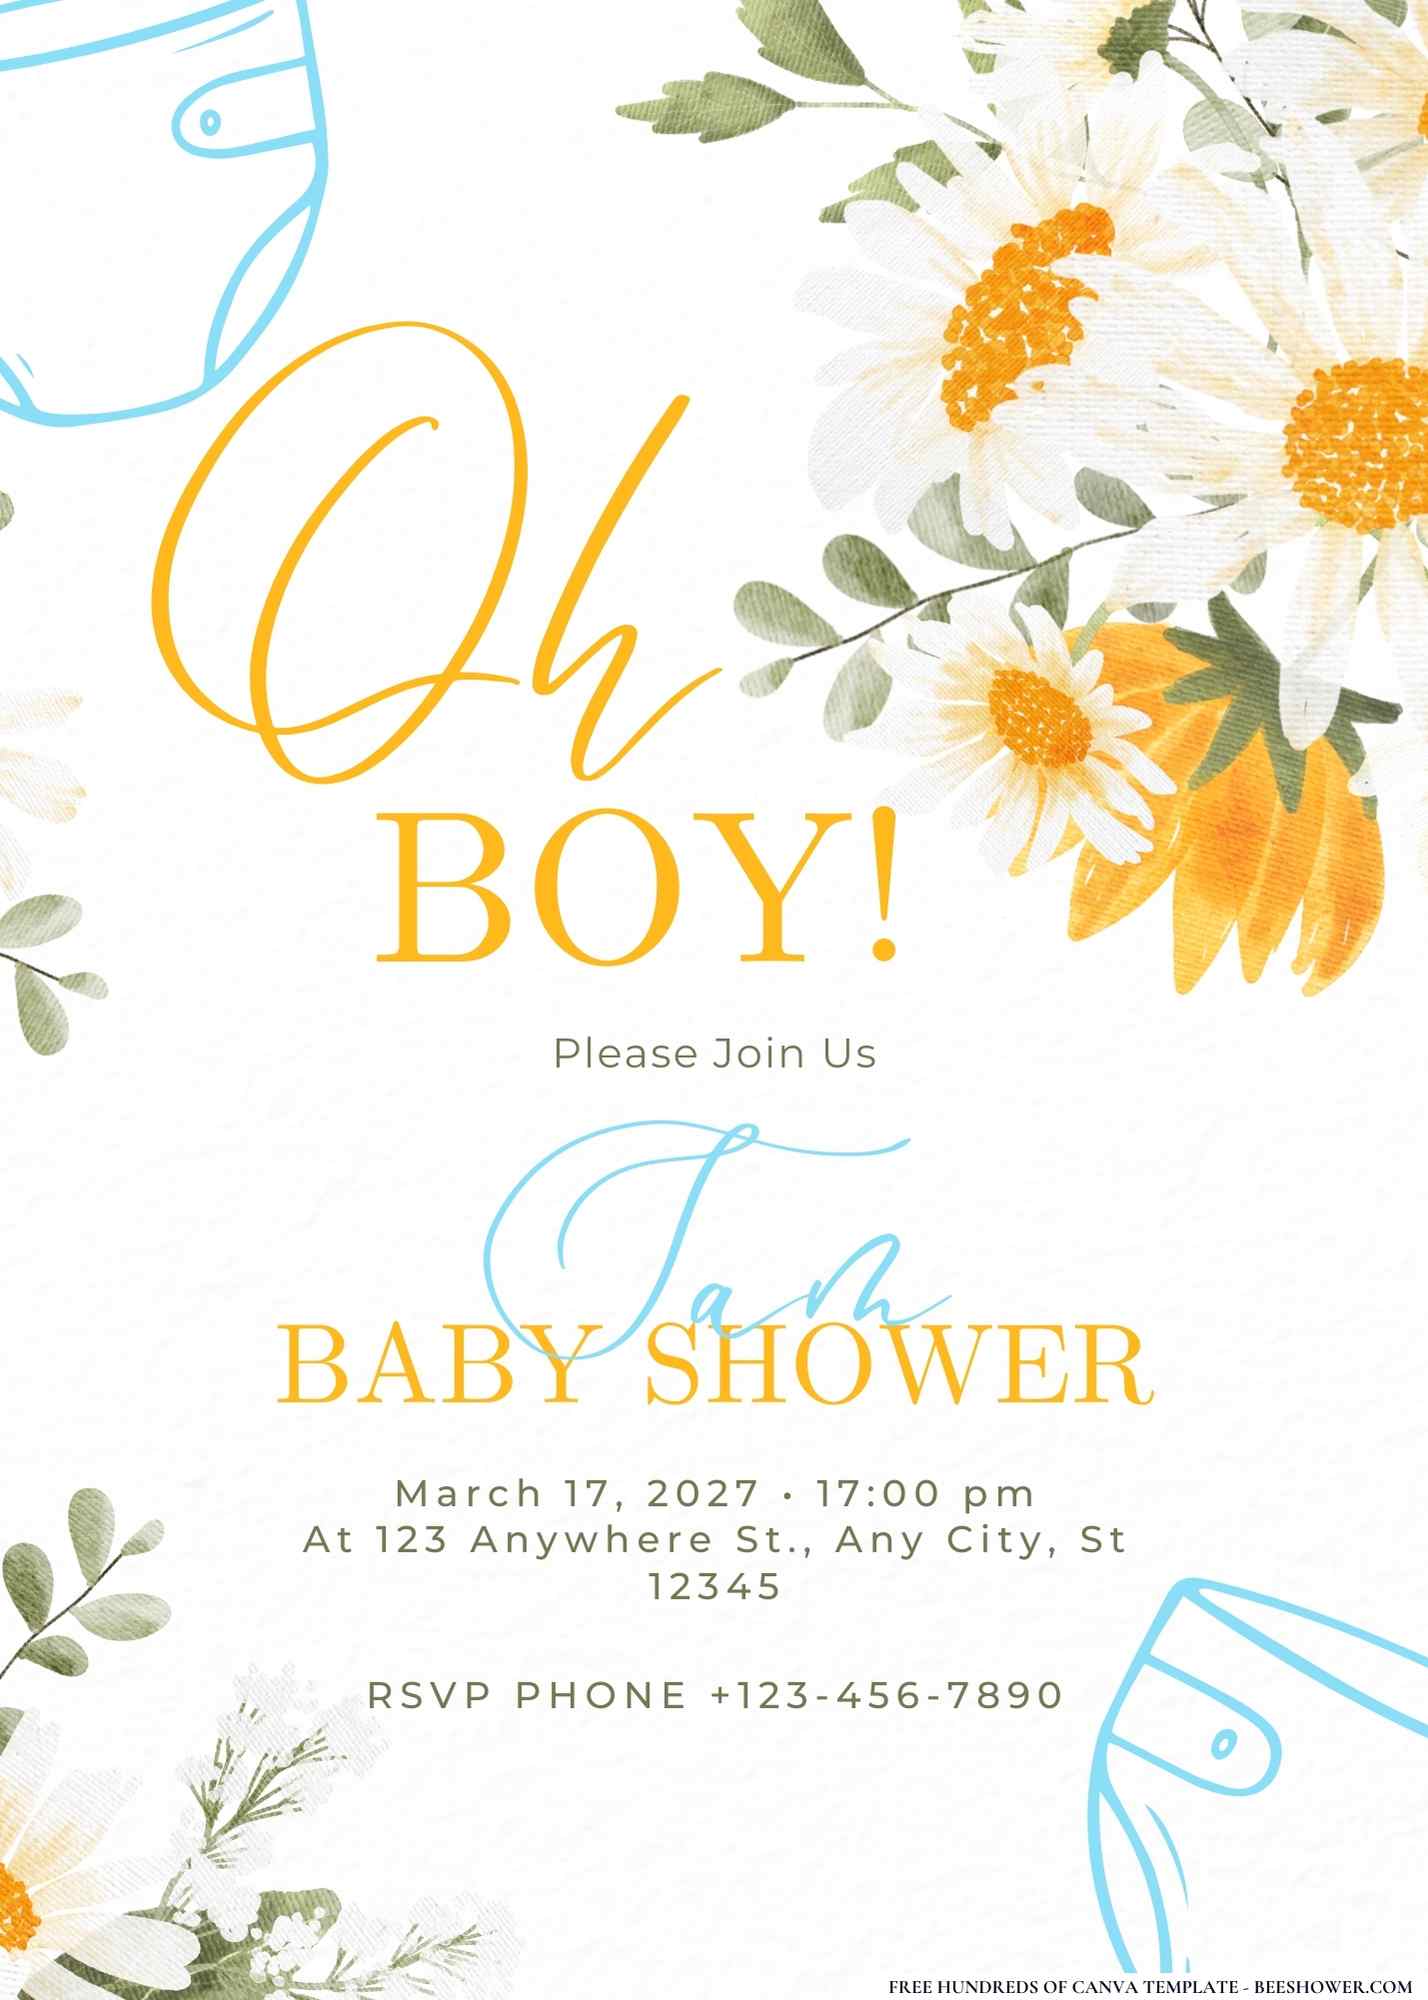 Daisy Chains and Diapers Baby Shower Invitation